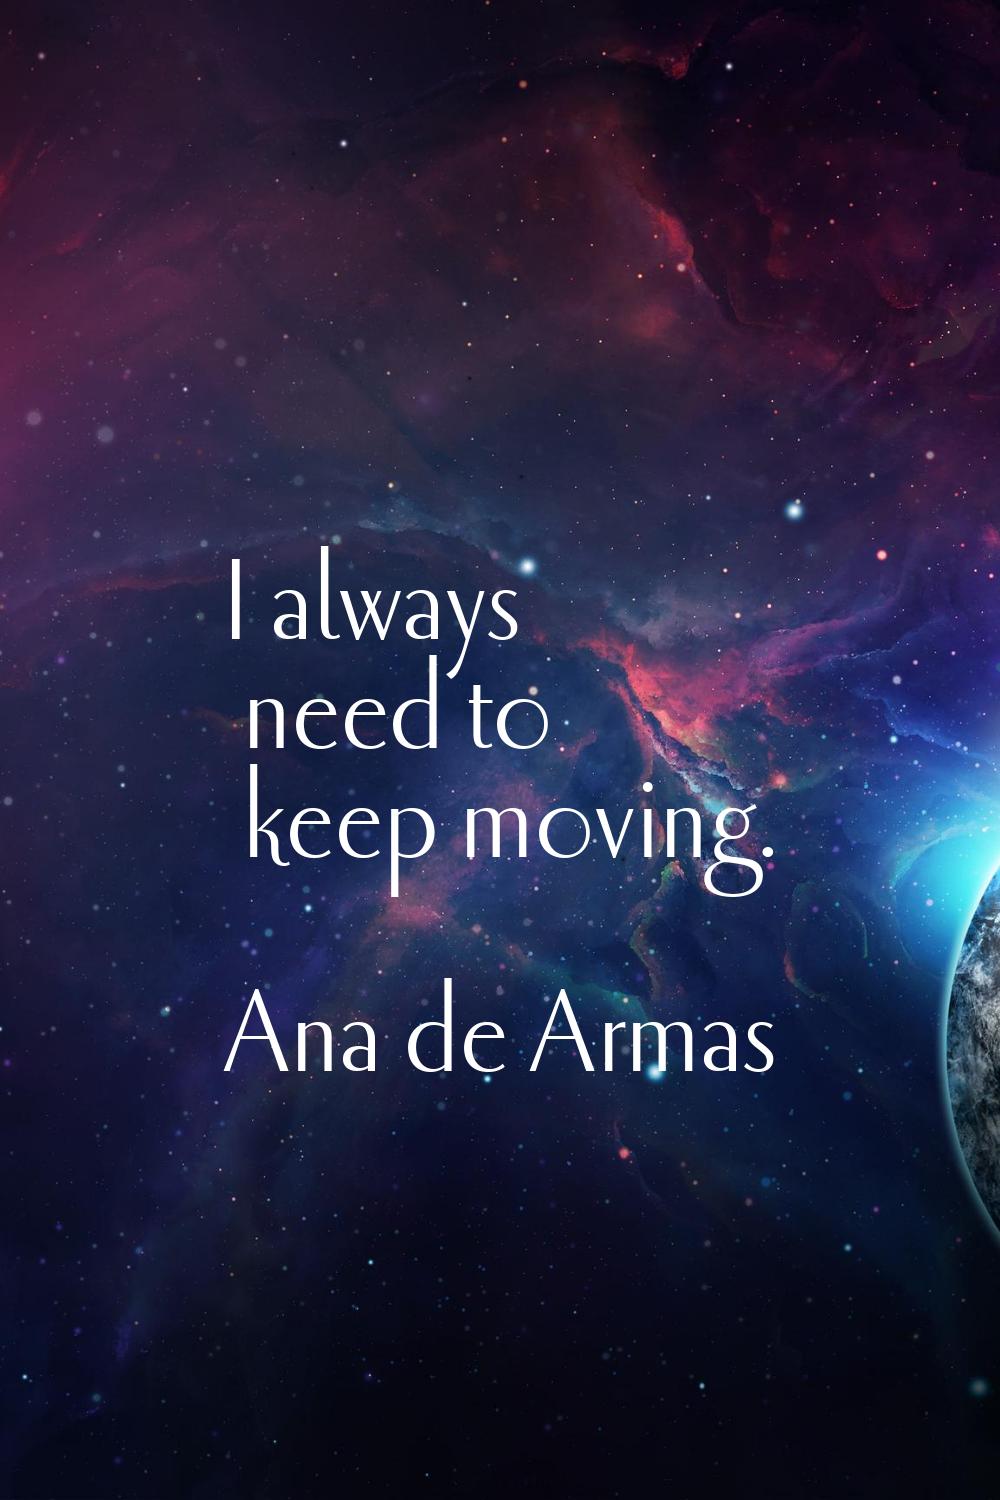 I always need to keep moving.